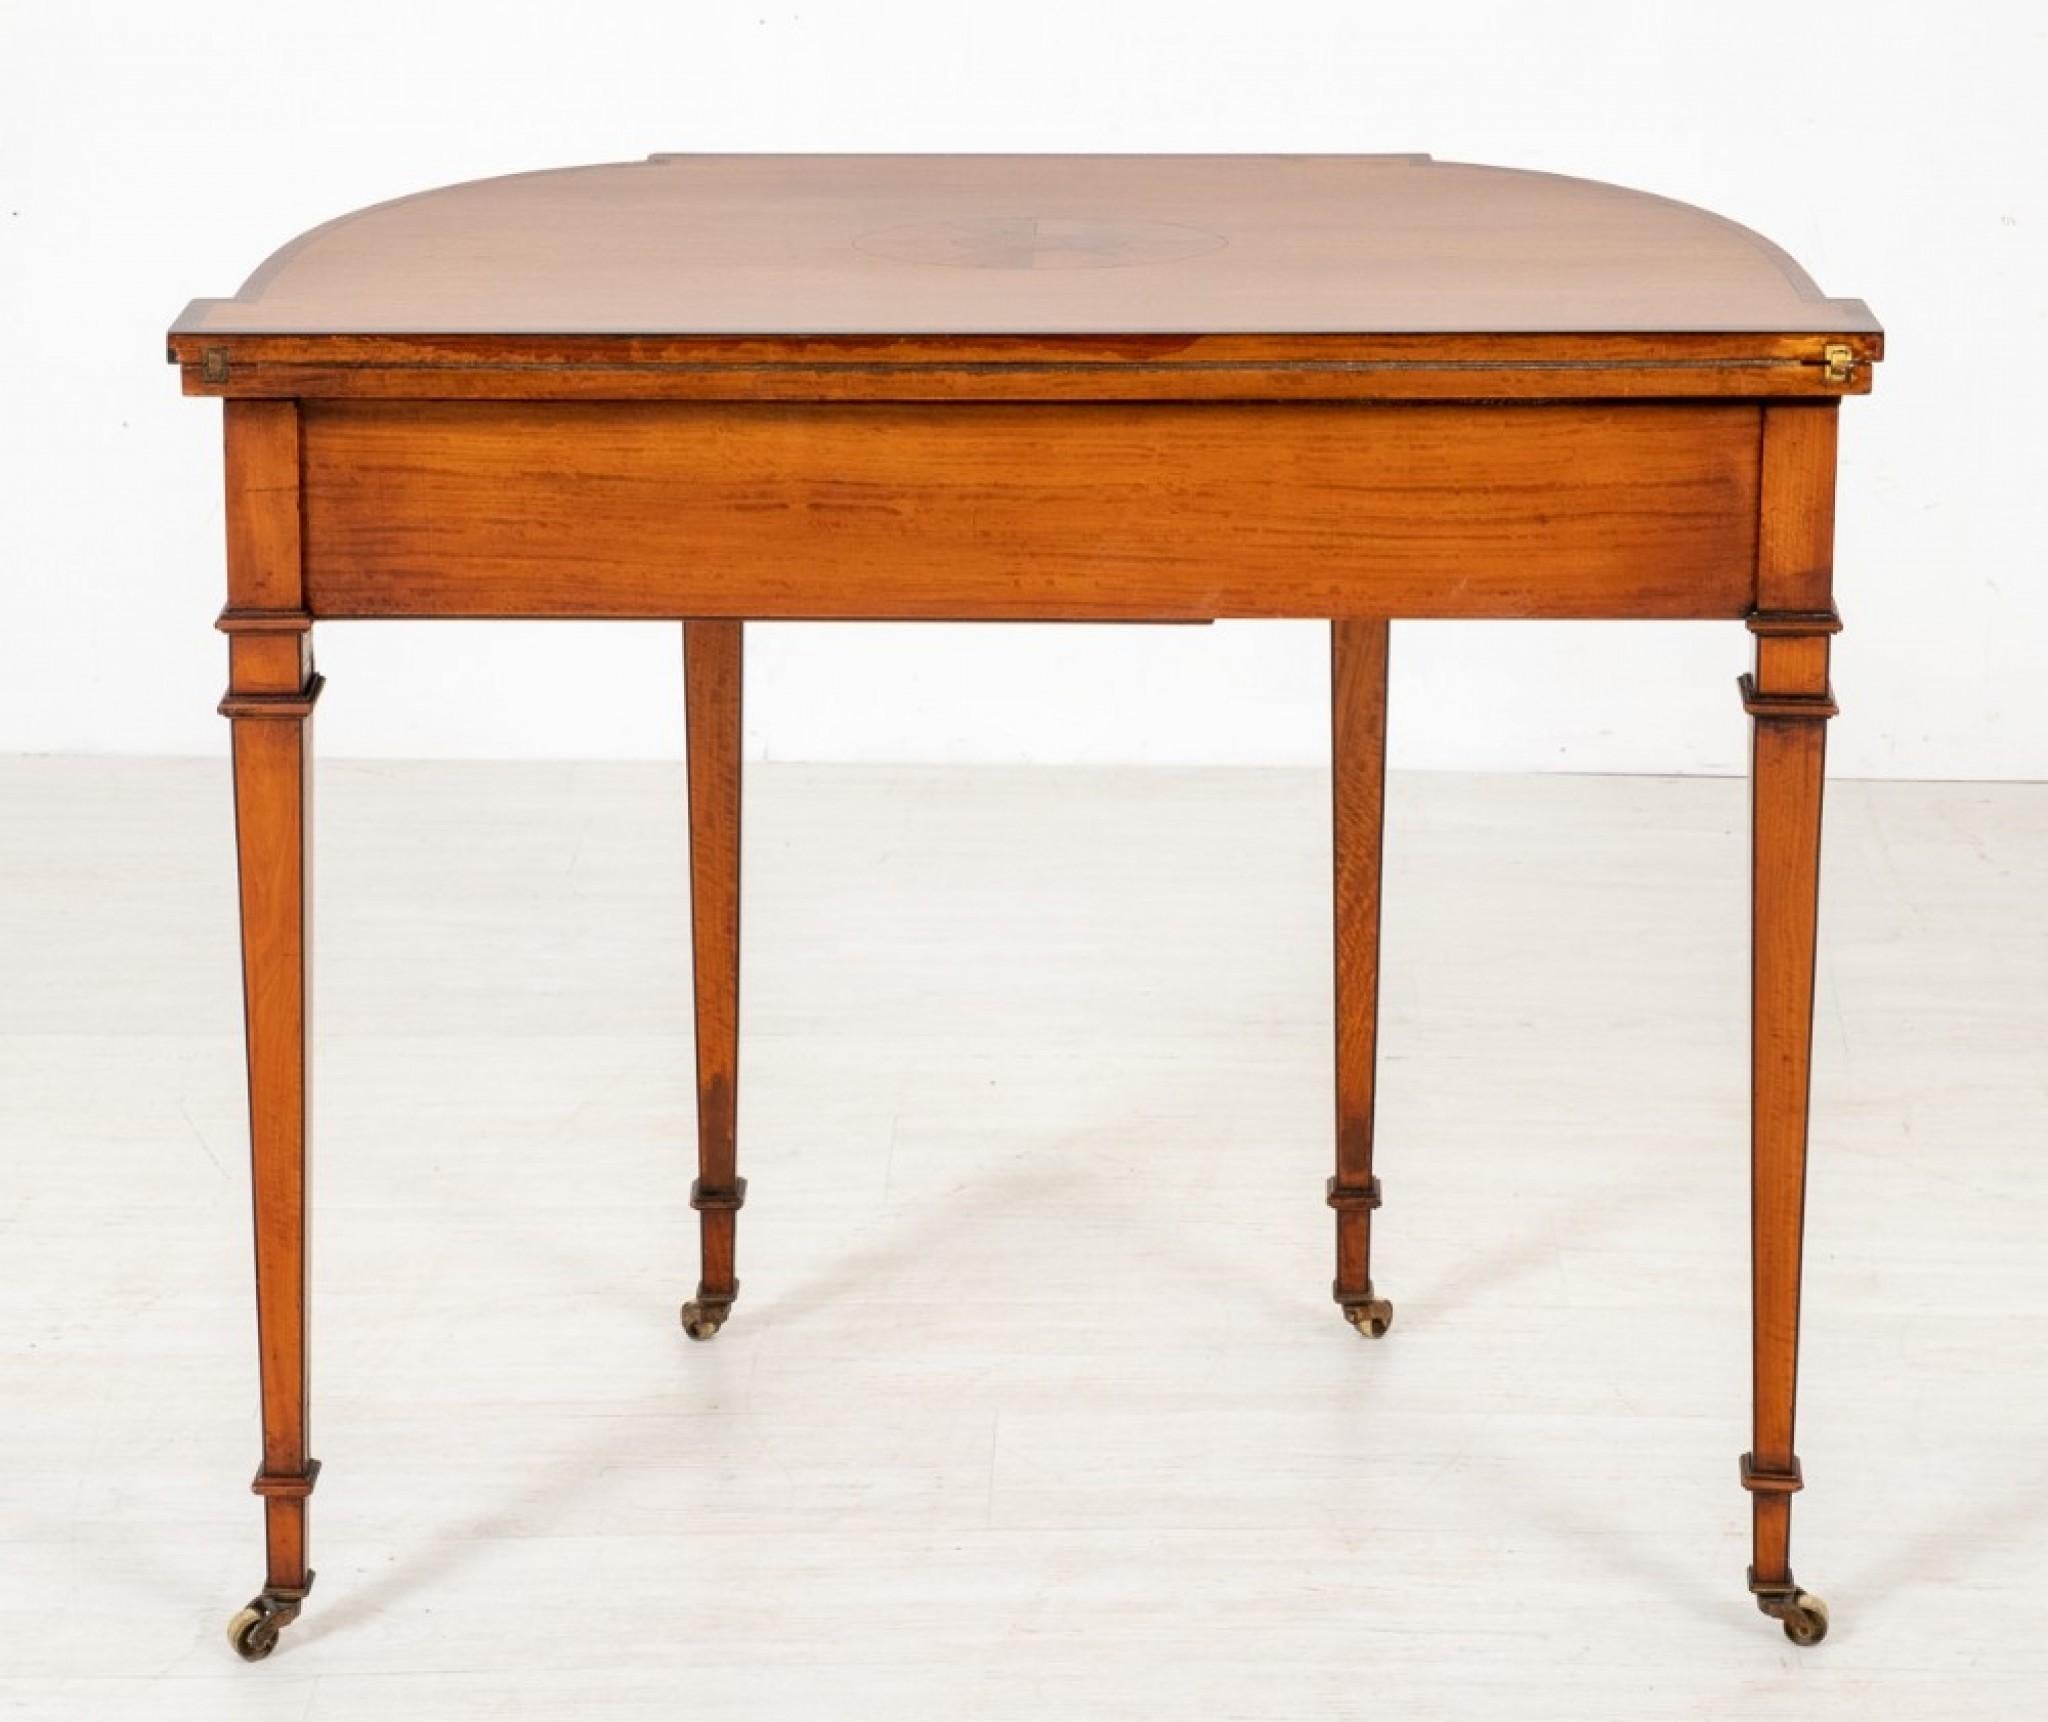 Late 19th Century Hepplewhite Card Table, Antique Satinwood Games Tables, 1880 For Sale